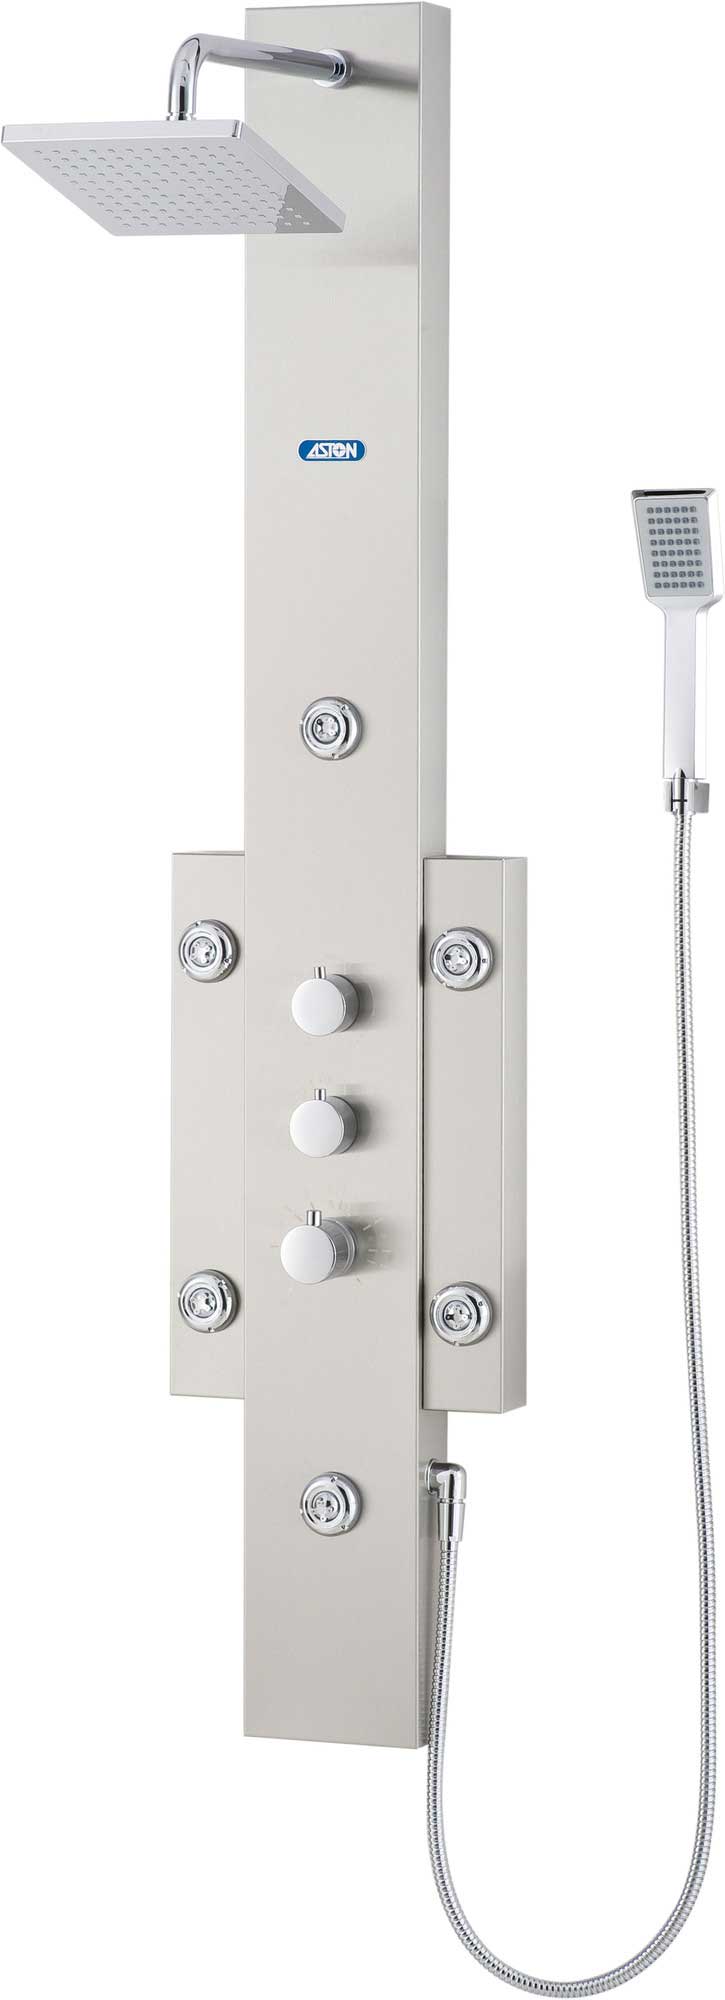 Aston Dual Function Shower Panel with Six Body Jets